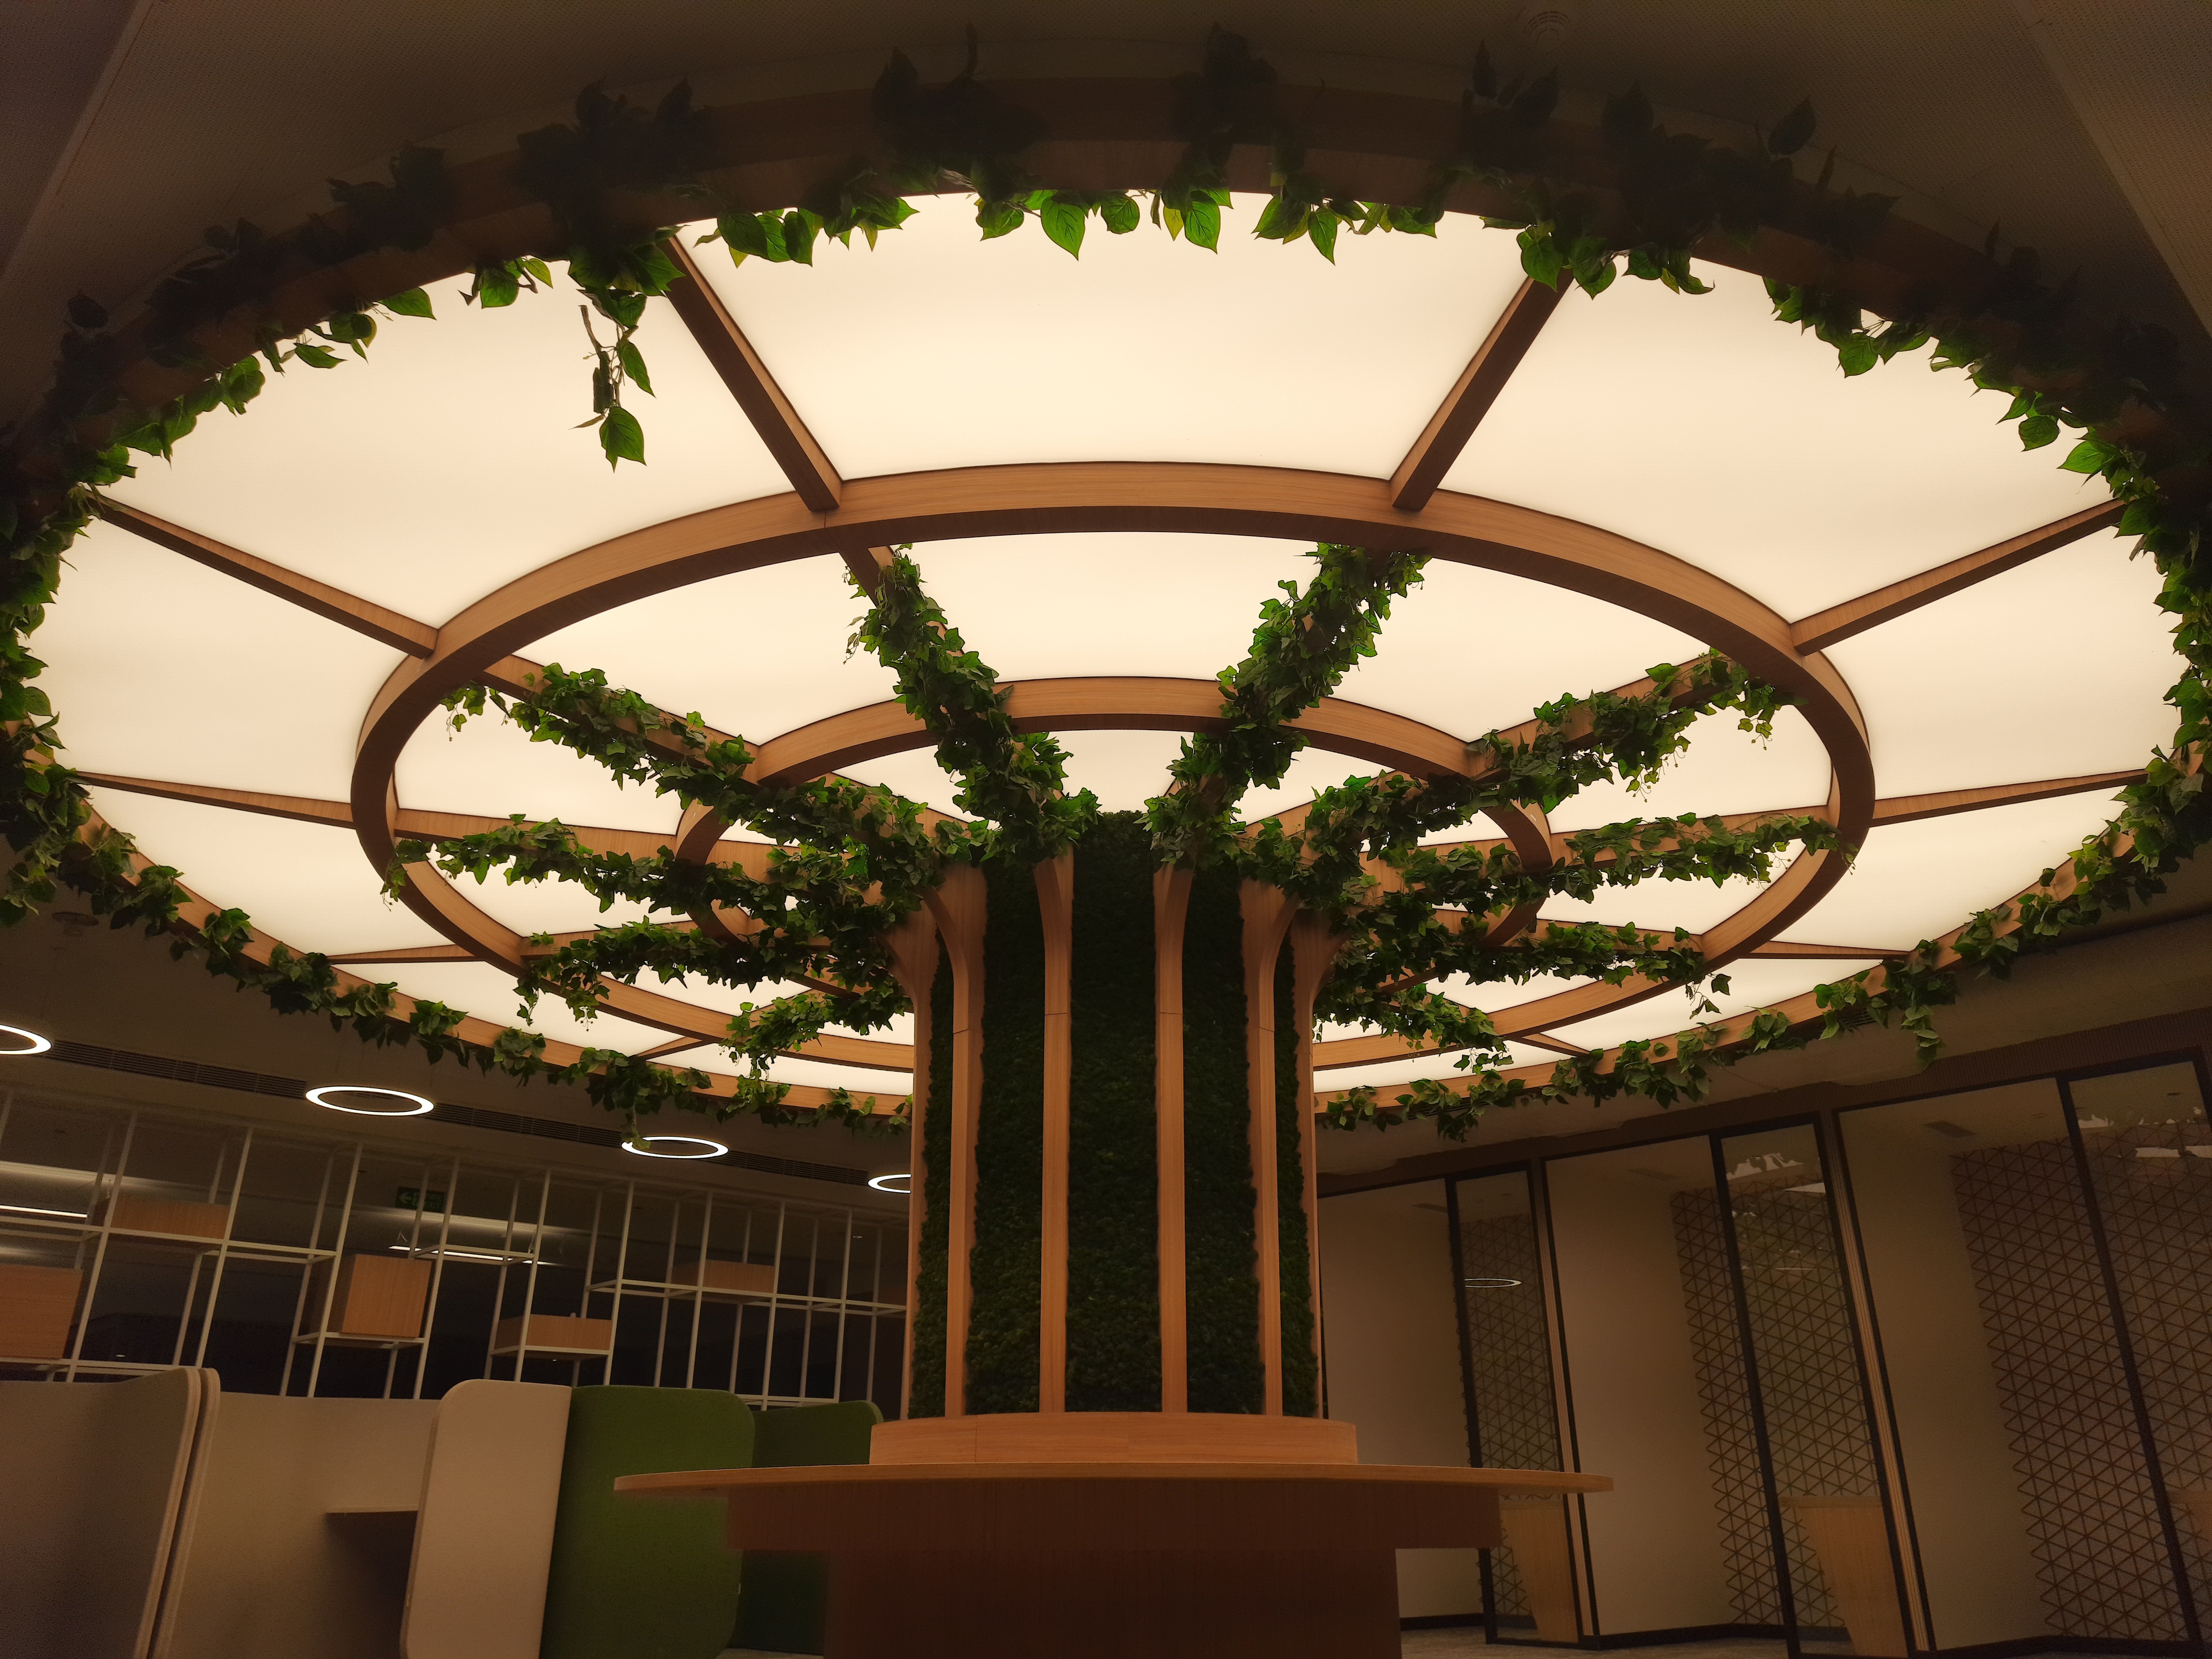 Newmat stretch ceilings used in Biophilic Design at Shell Chennai.